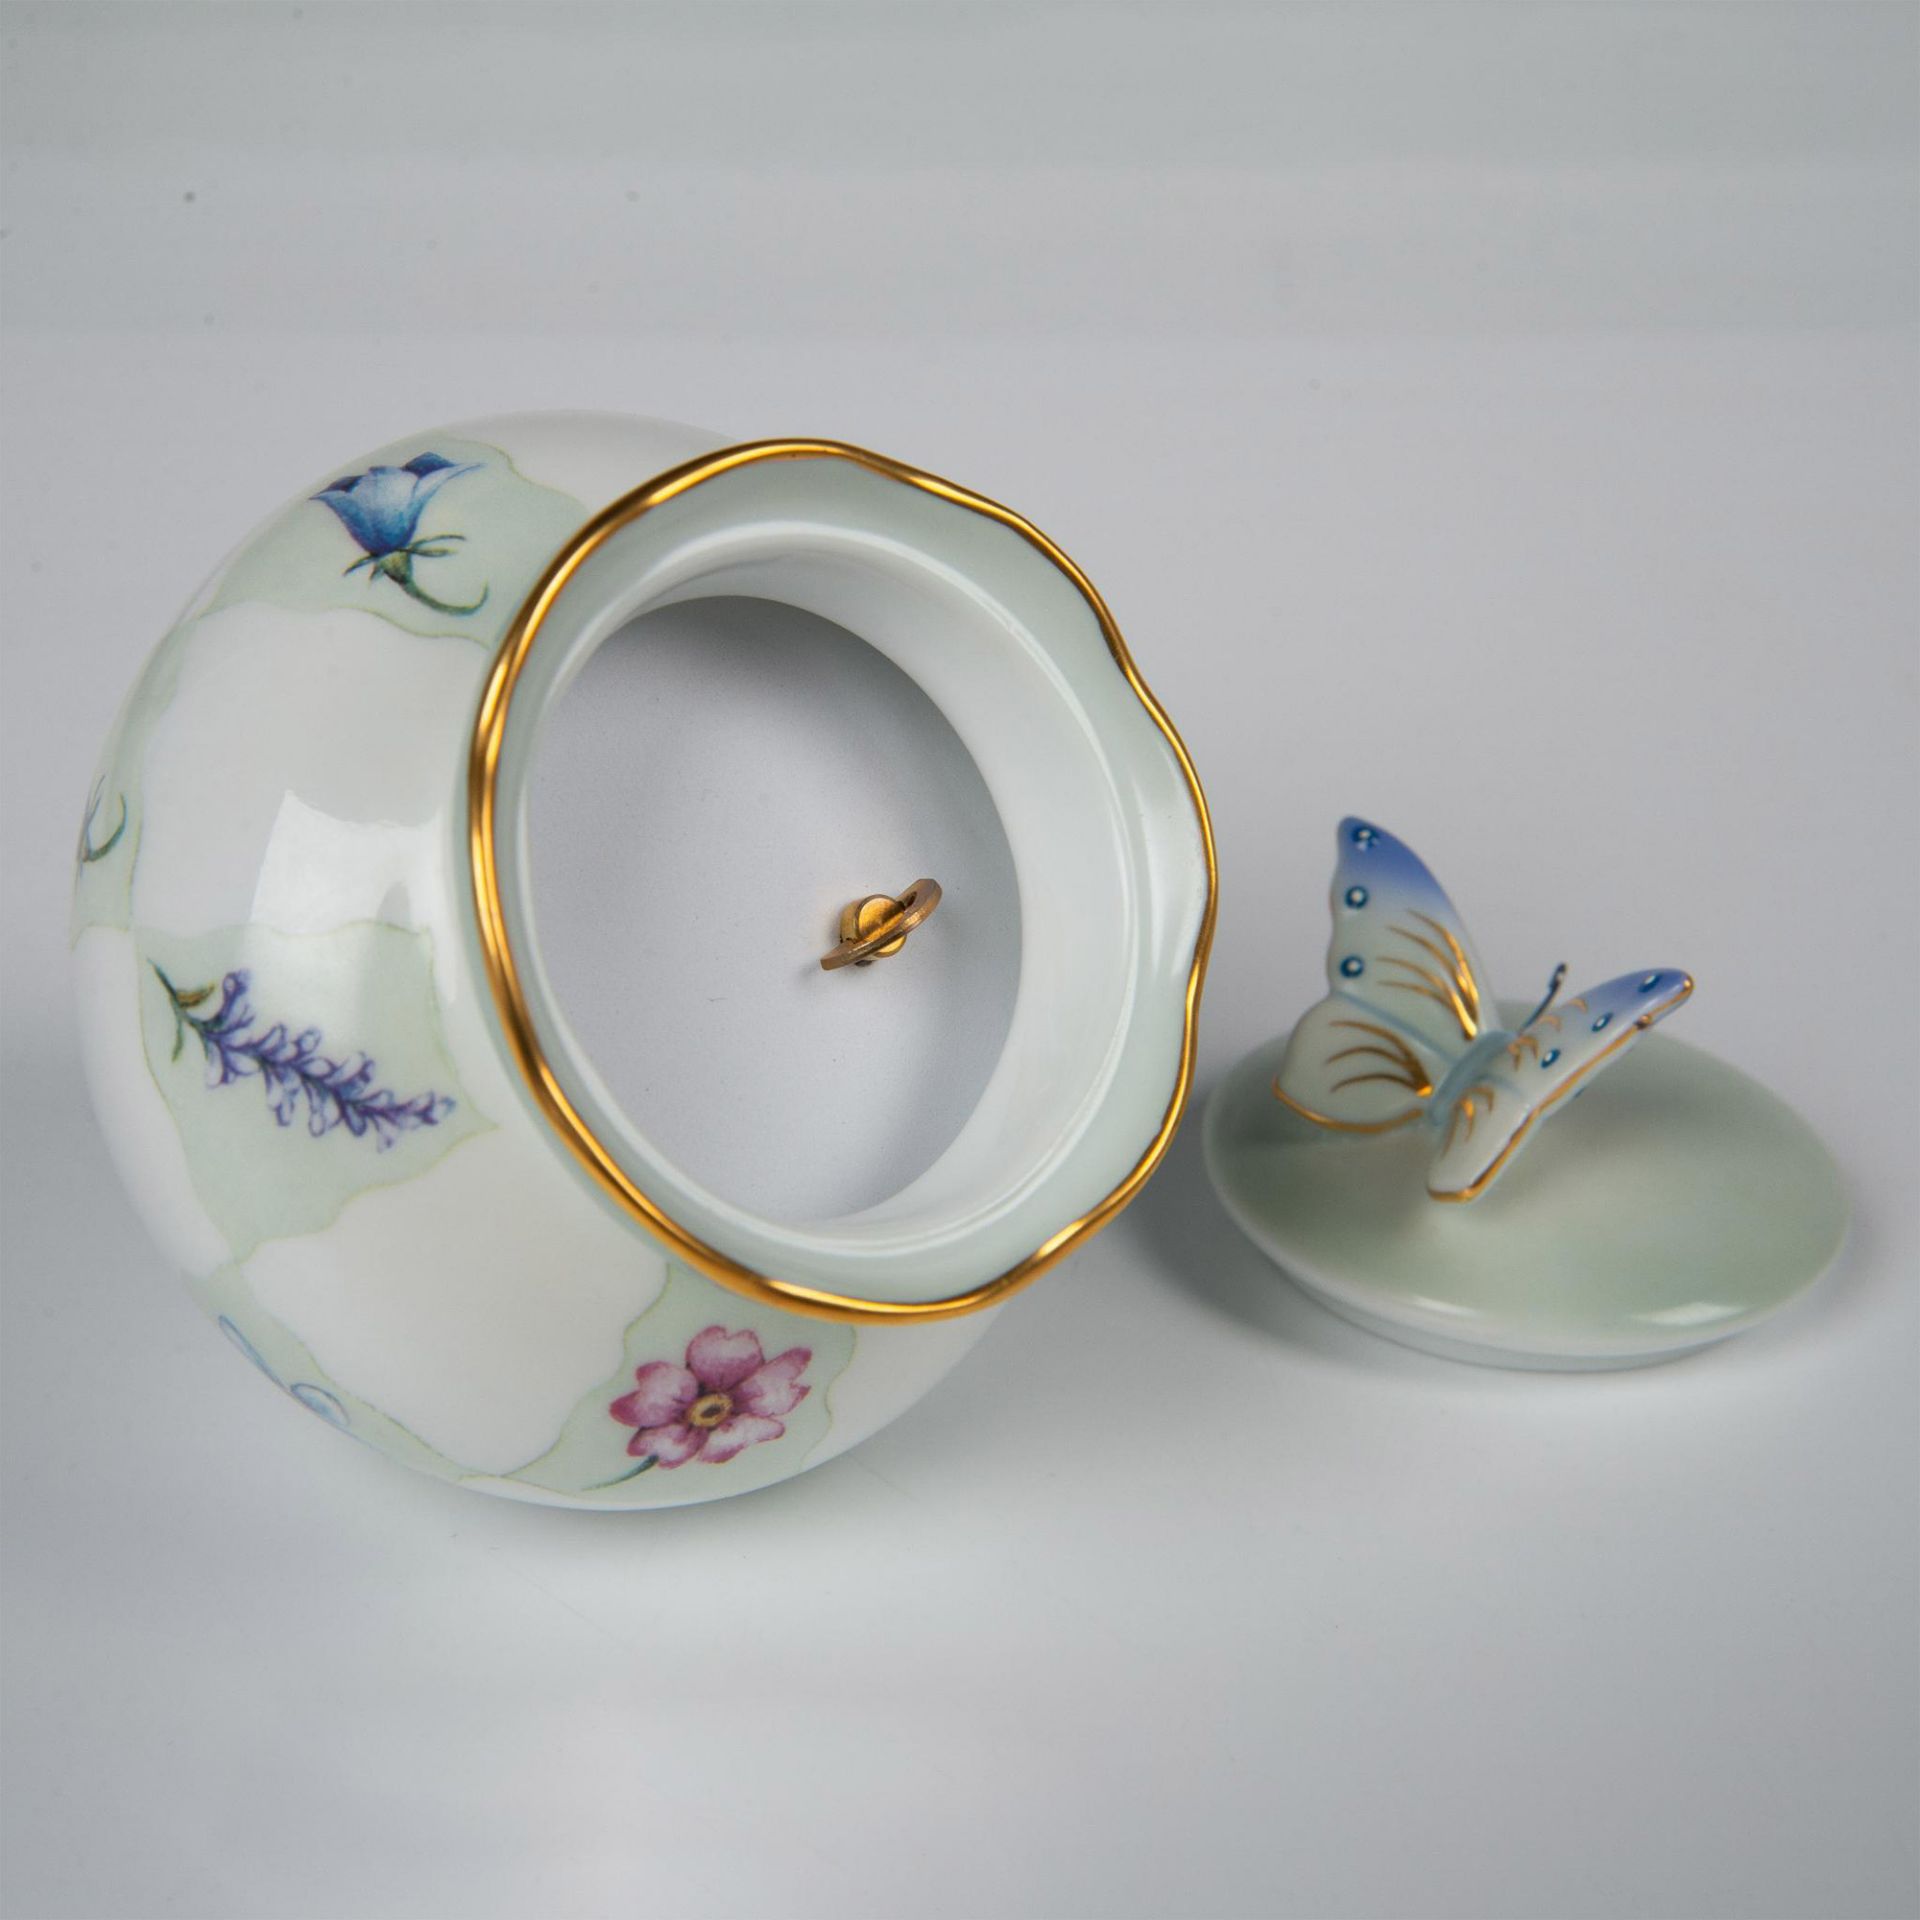 4pc Heirloom Porcelain Music Boxes and Handled Bowl - Image 12 of 15